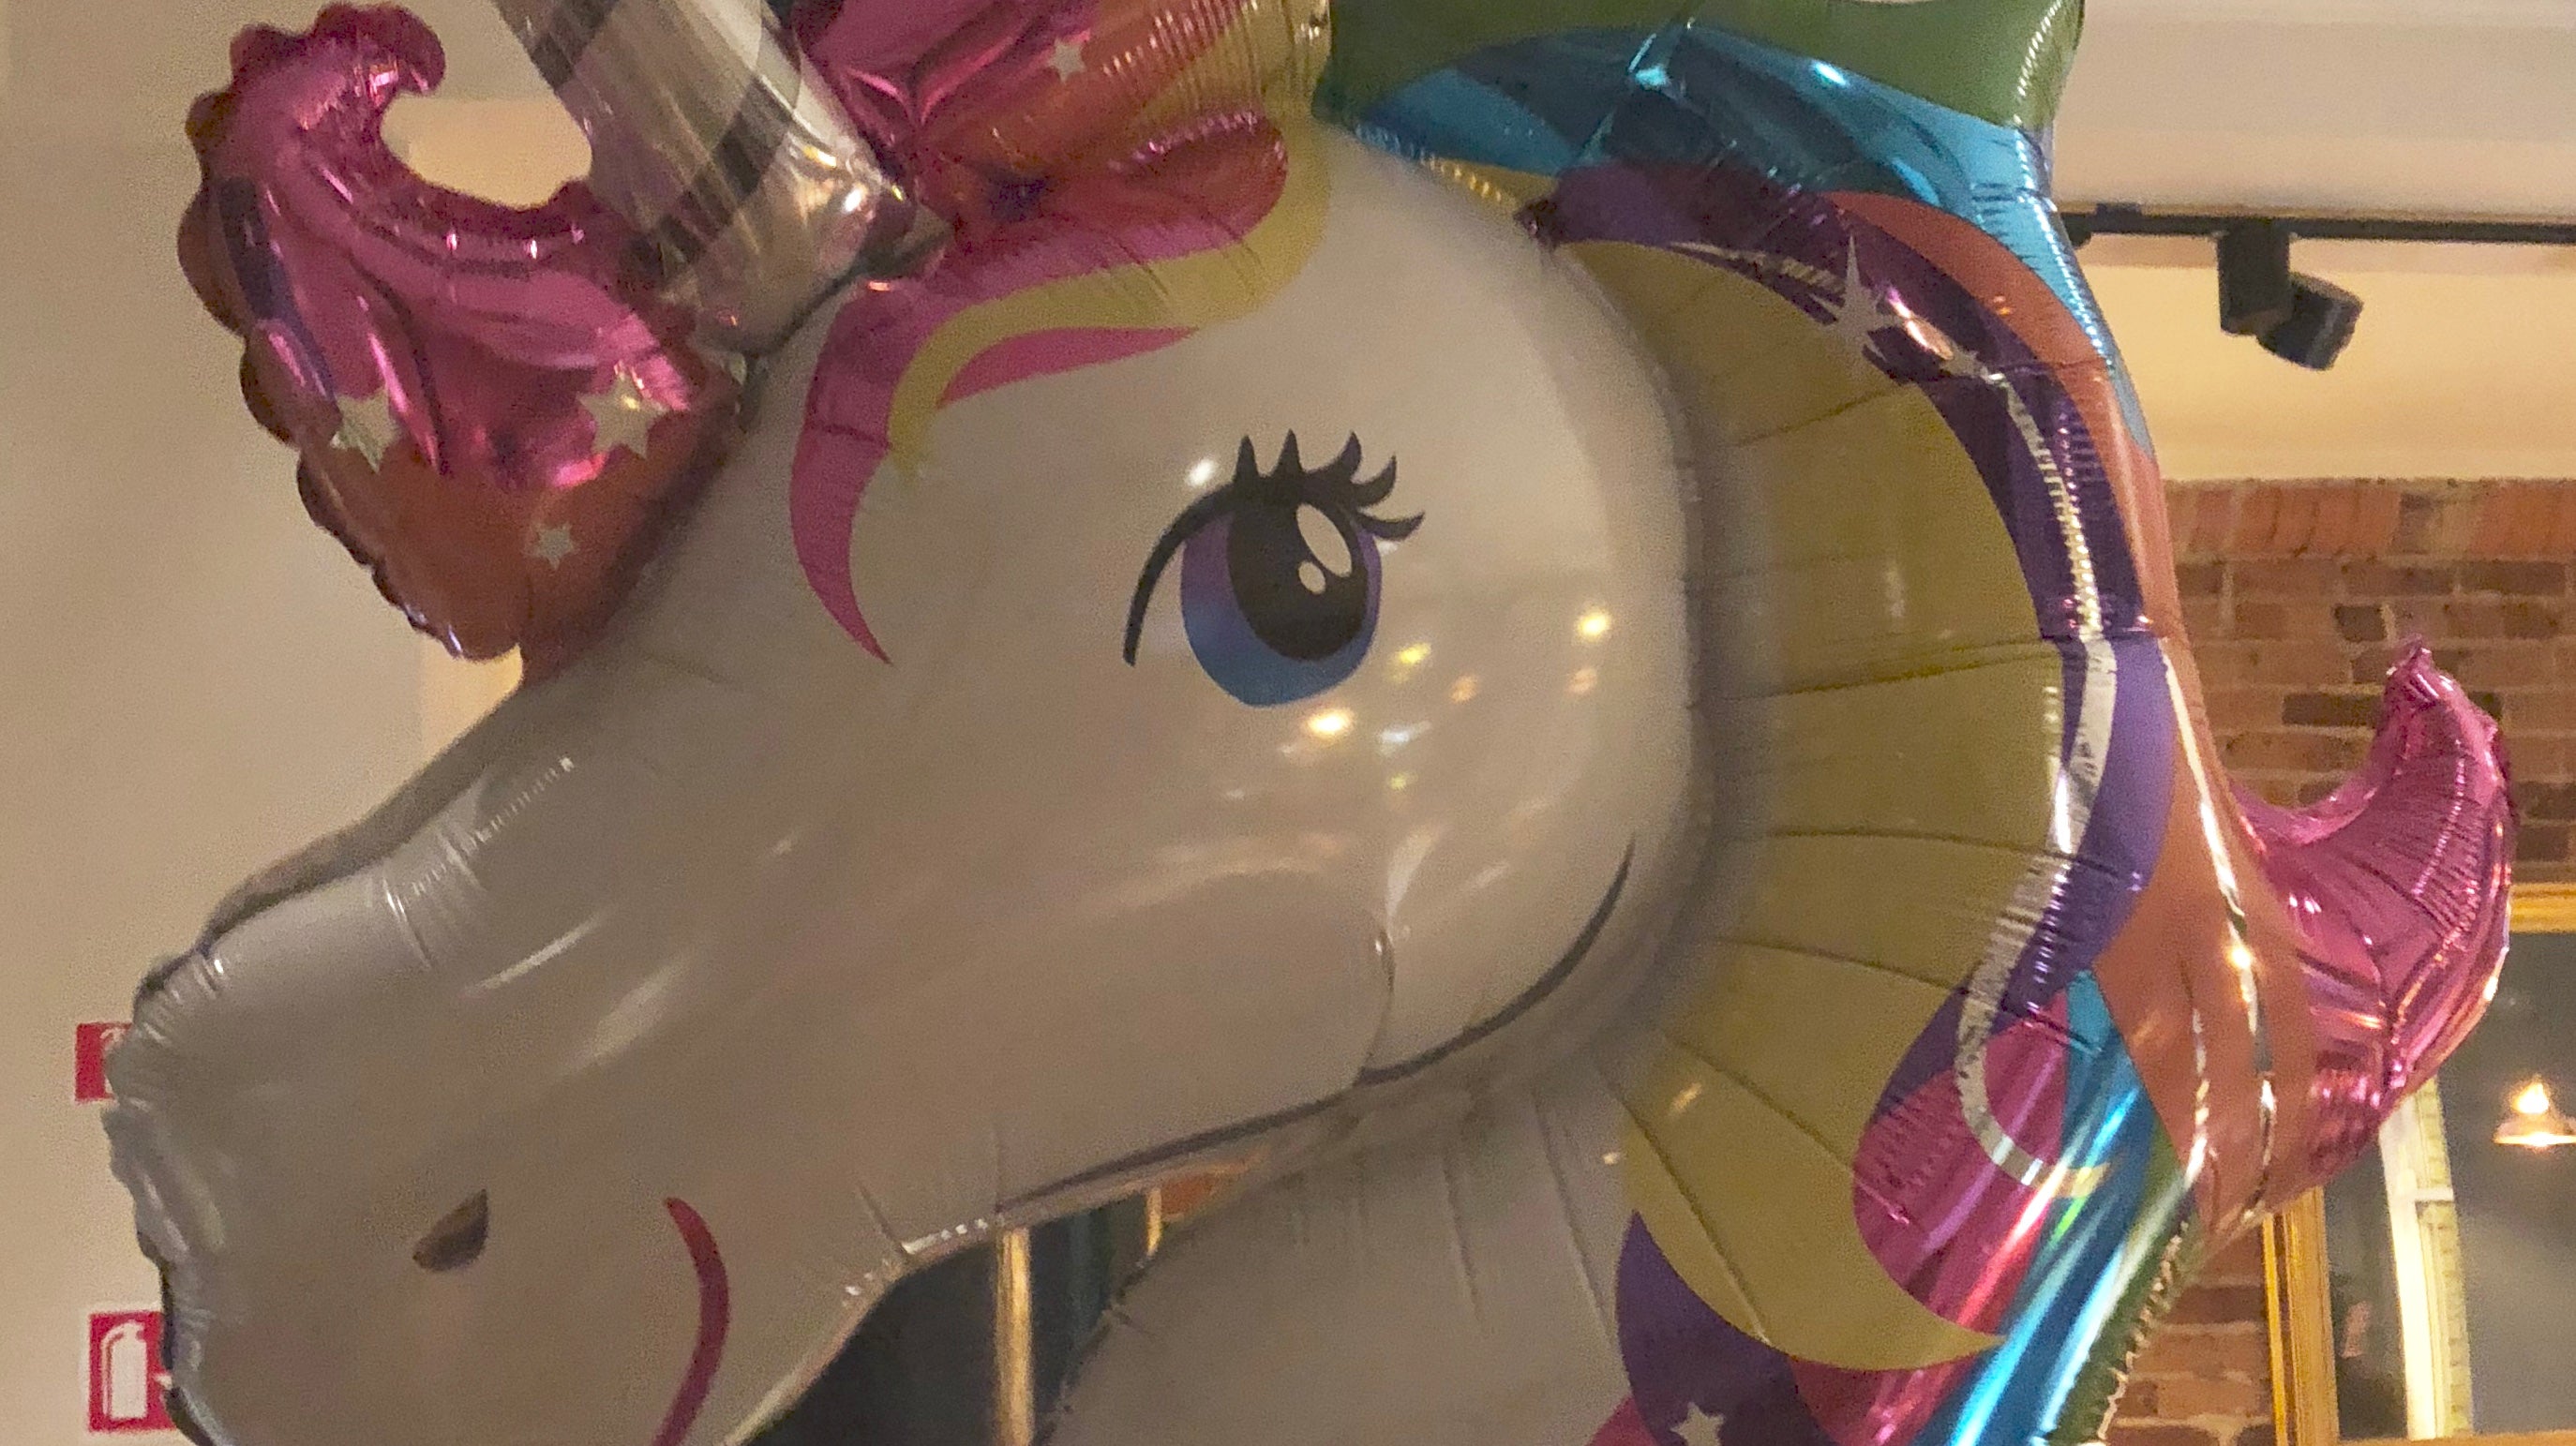 “But John, where else would I get a unicorn balloon at half three in the morning?” - Belfast Books